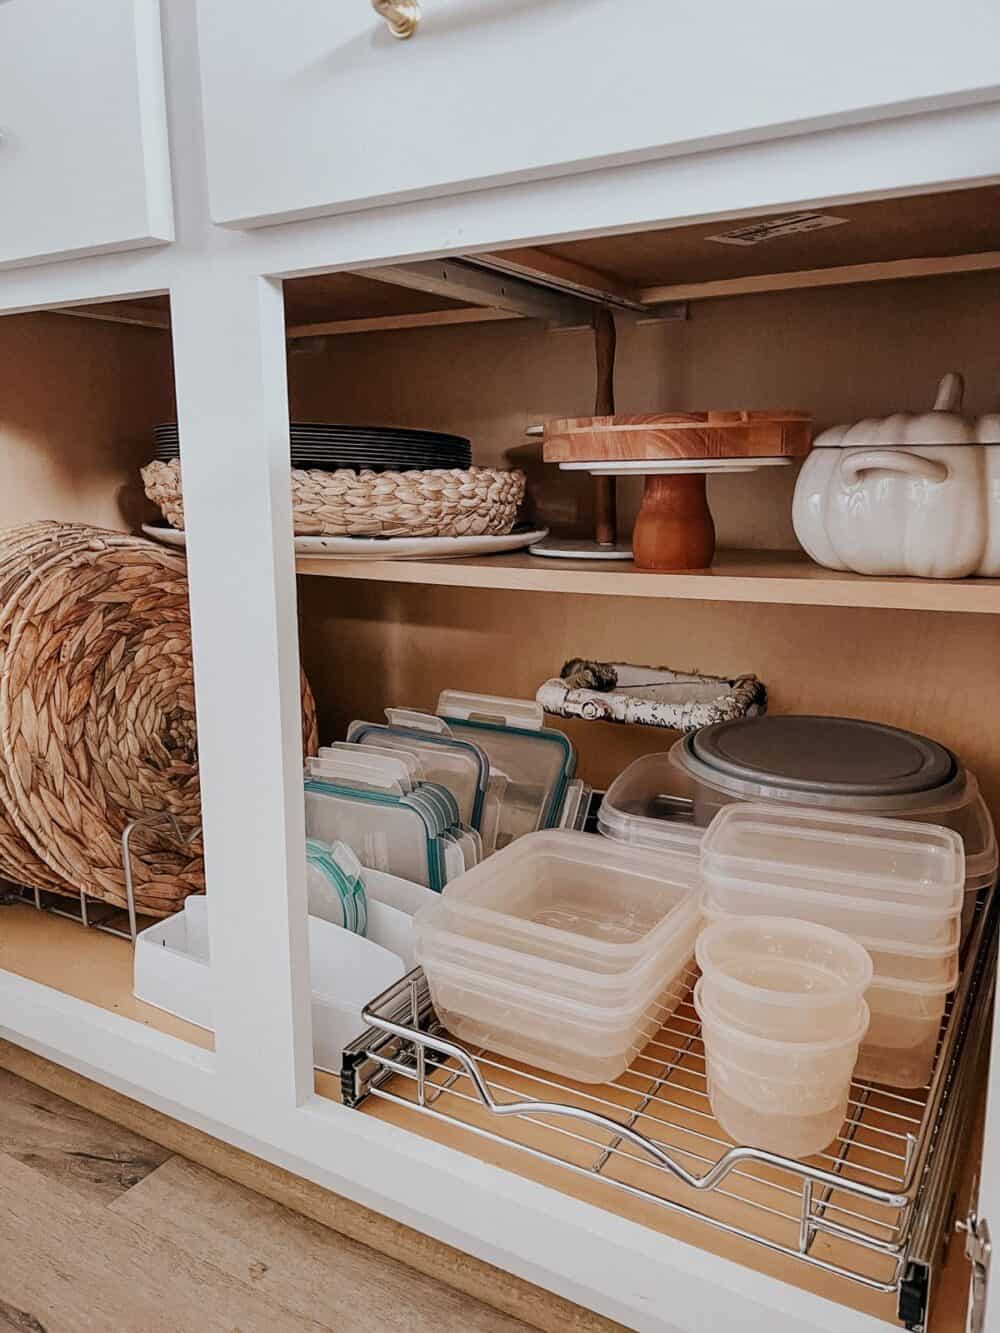 There's Now a Built-In Tupperware Organizer You Can Get For Your Kitchen